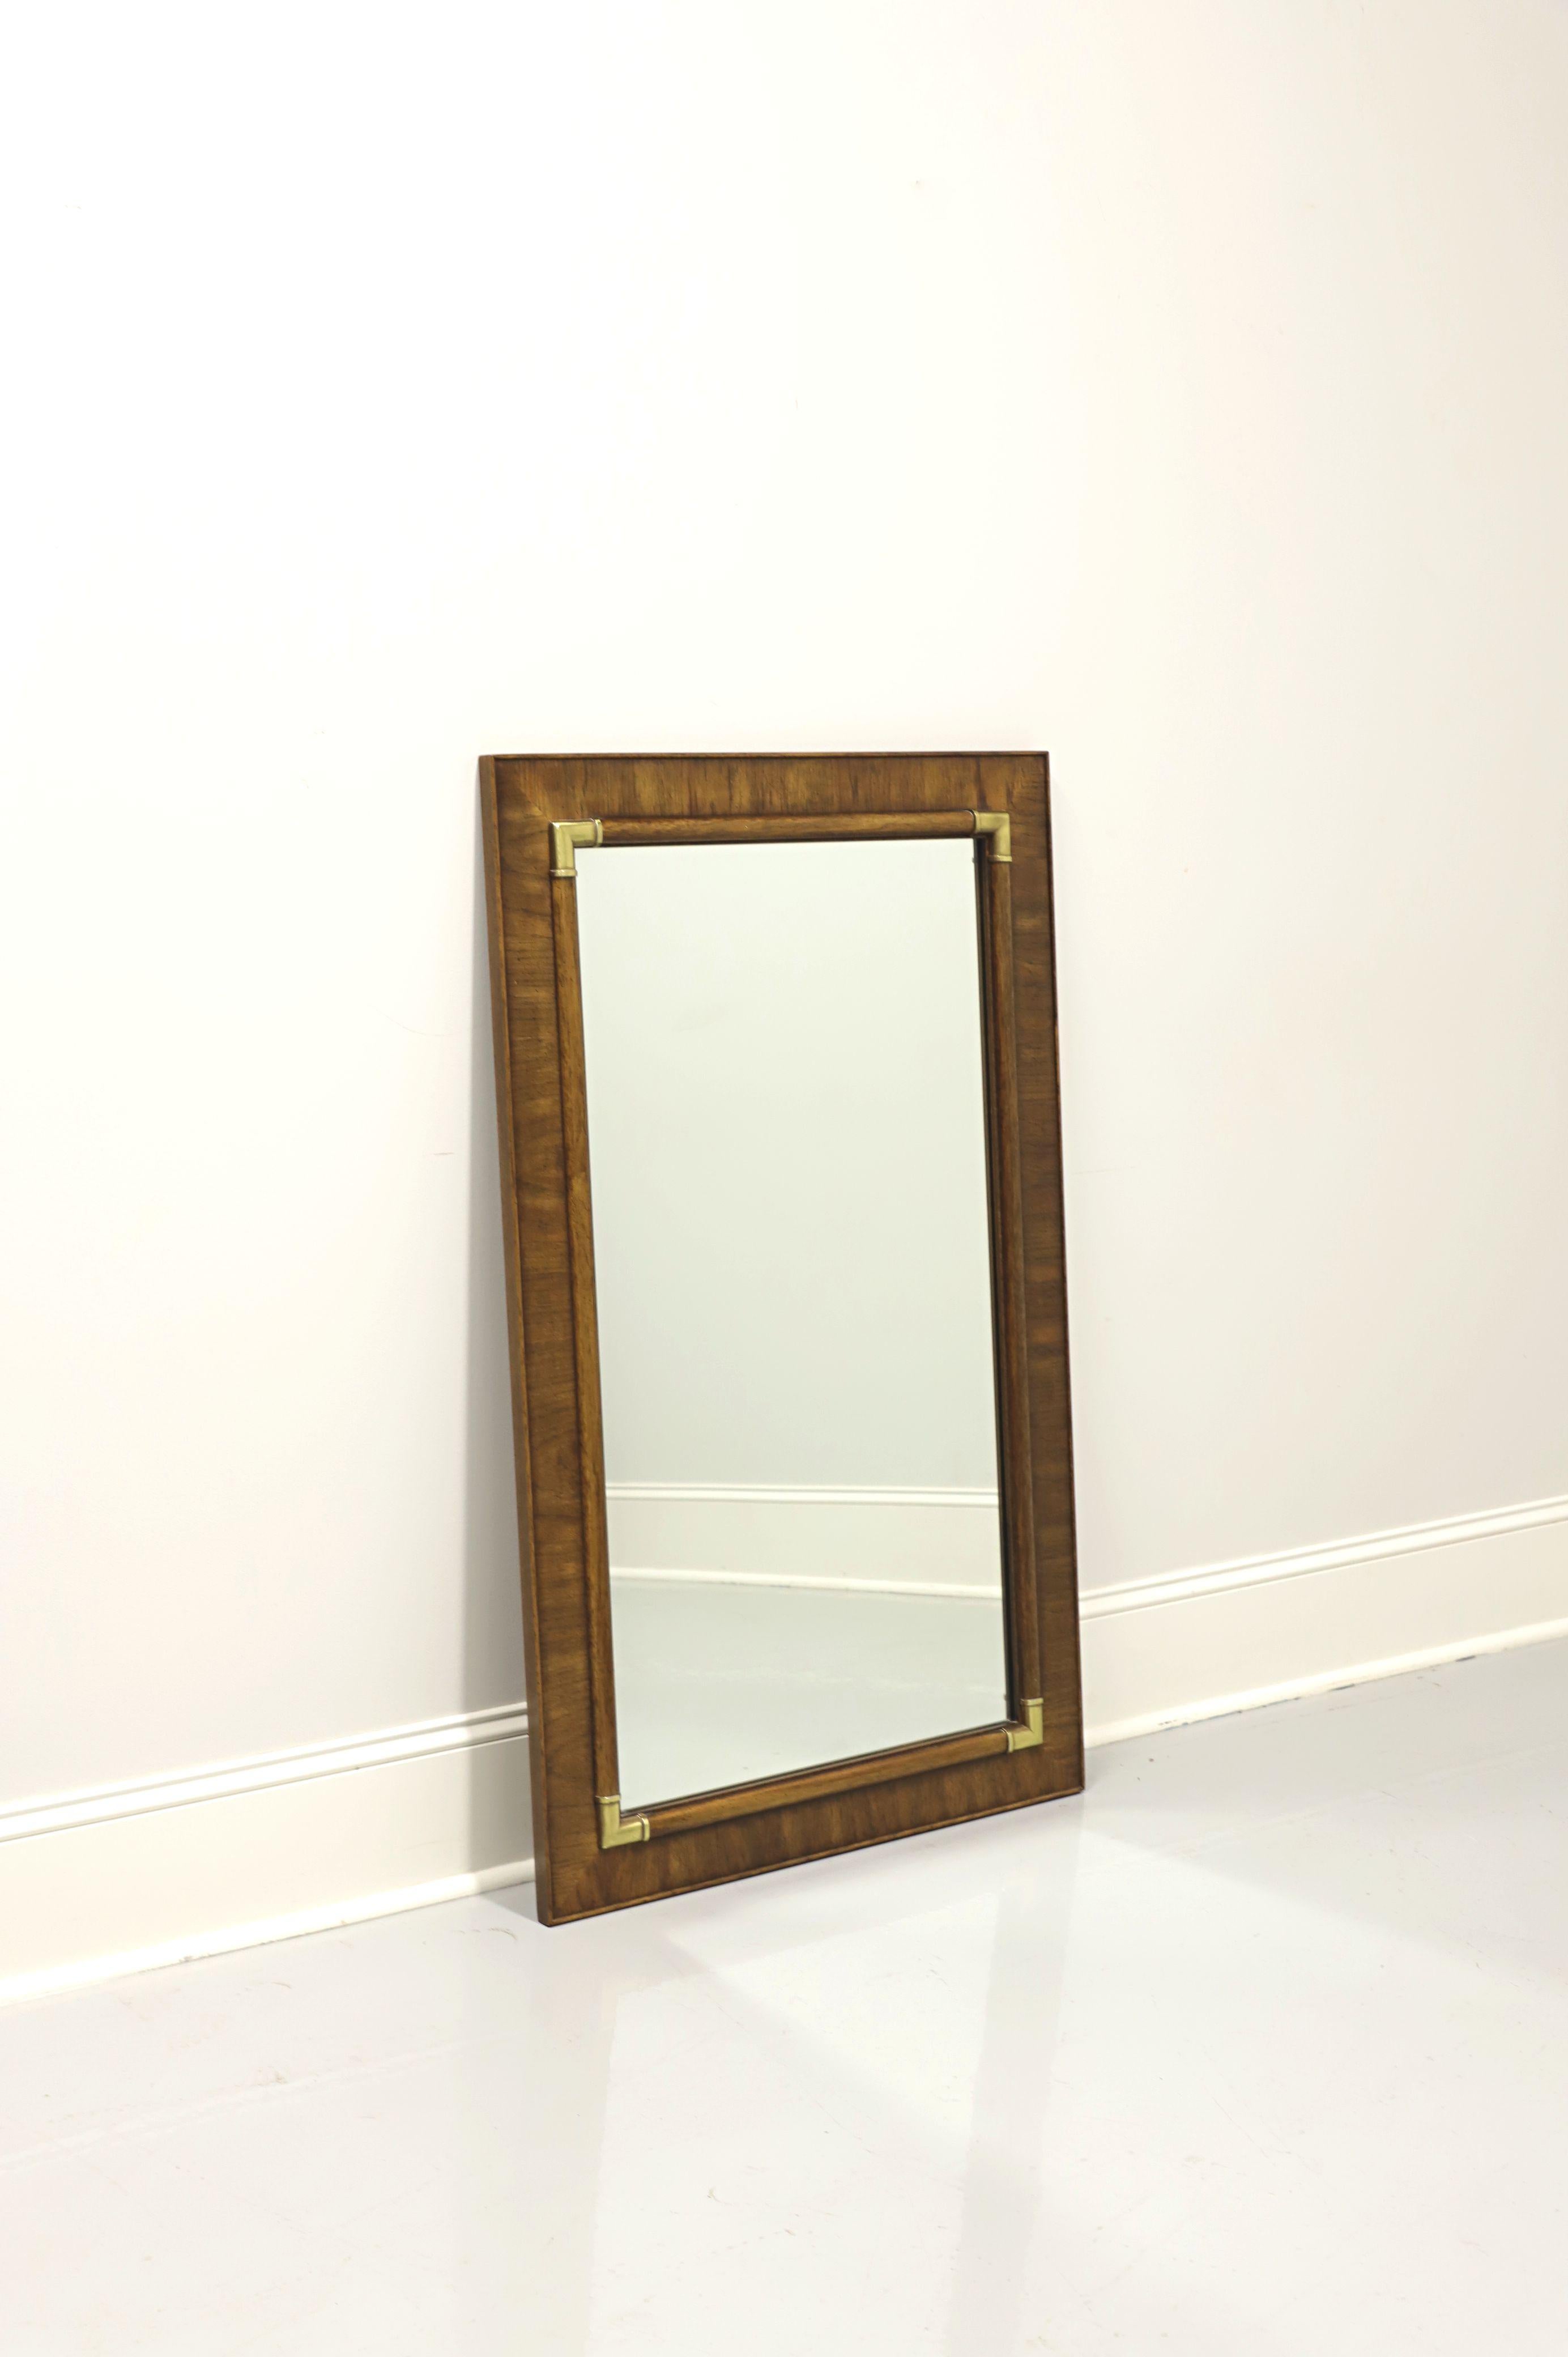 A Campaign style wall mirror by Drexel Heritage, from their Accolade collection. Mirror glass and rectangular banded pecan frame with brass accents. Made in North Carolina, USA, circa 1981. 

Style #: 904-210

Measures: 29W 1.25D 47H, Weighs